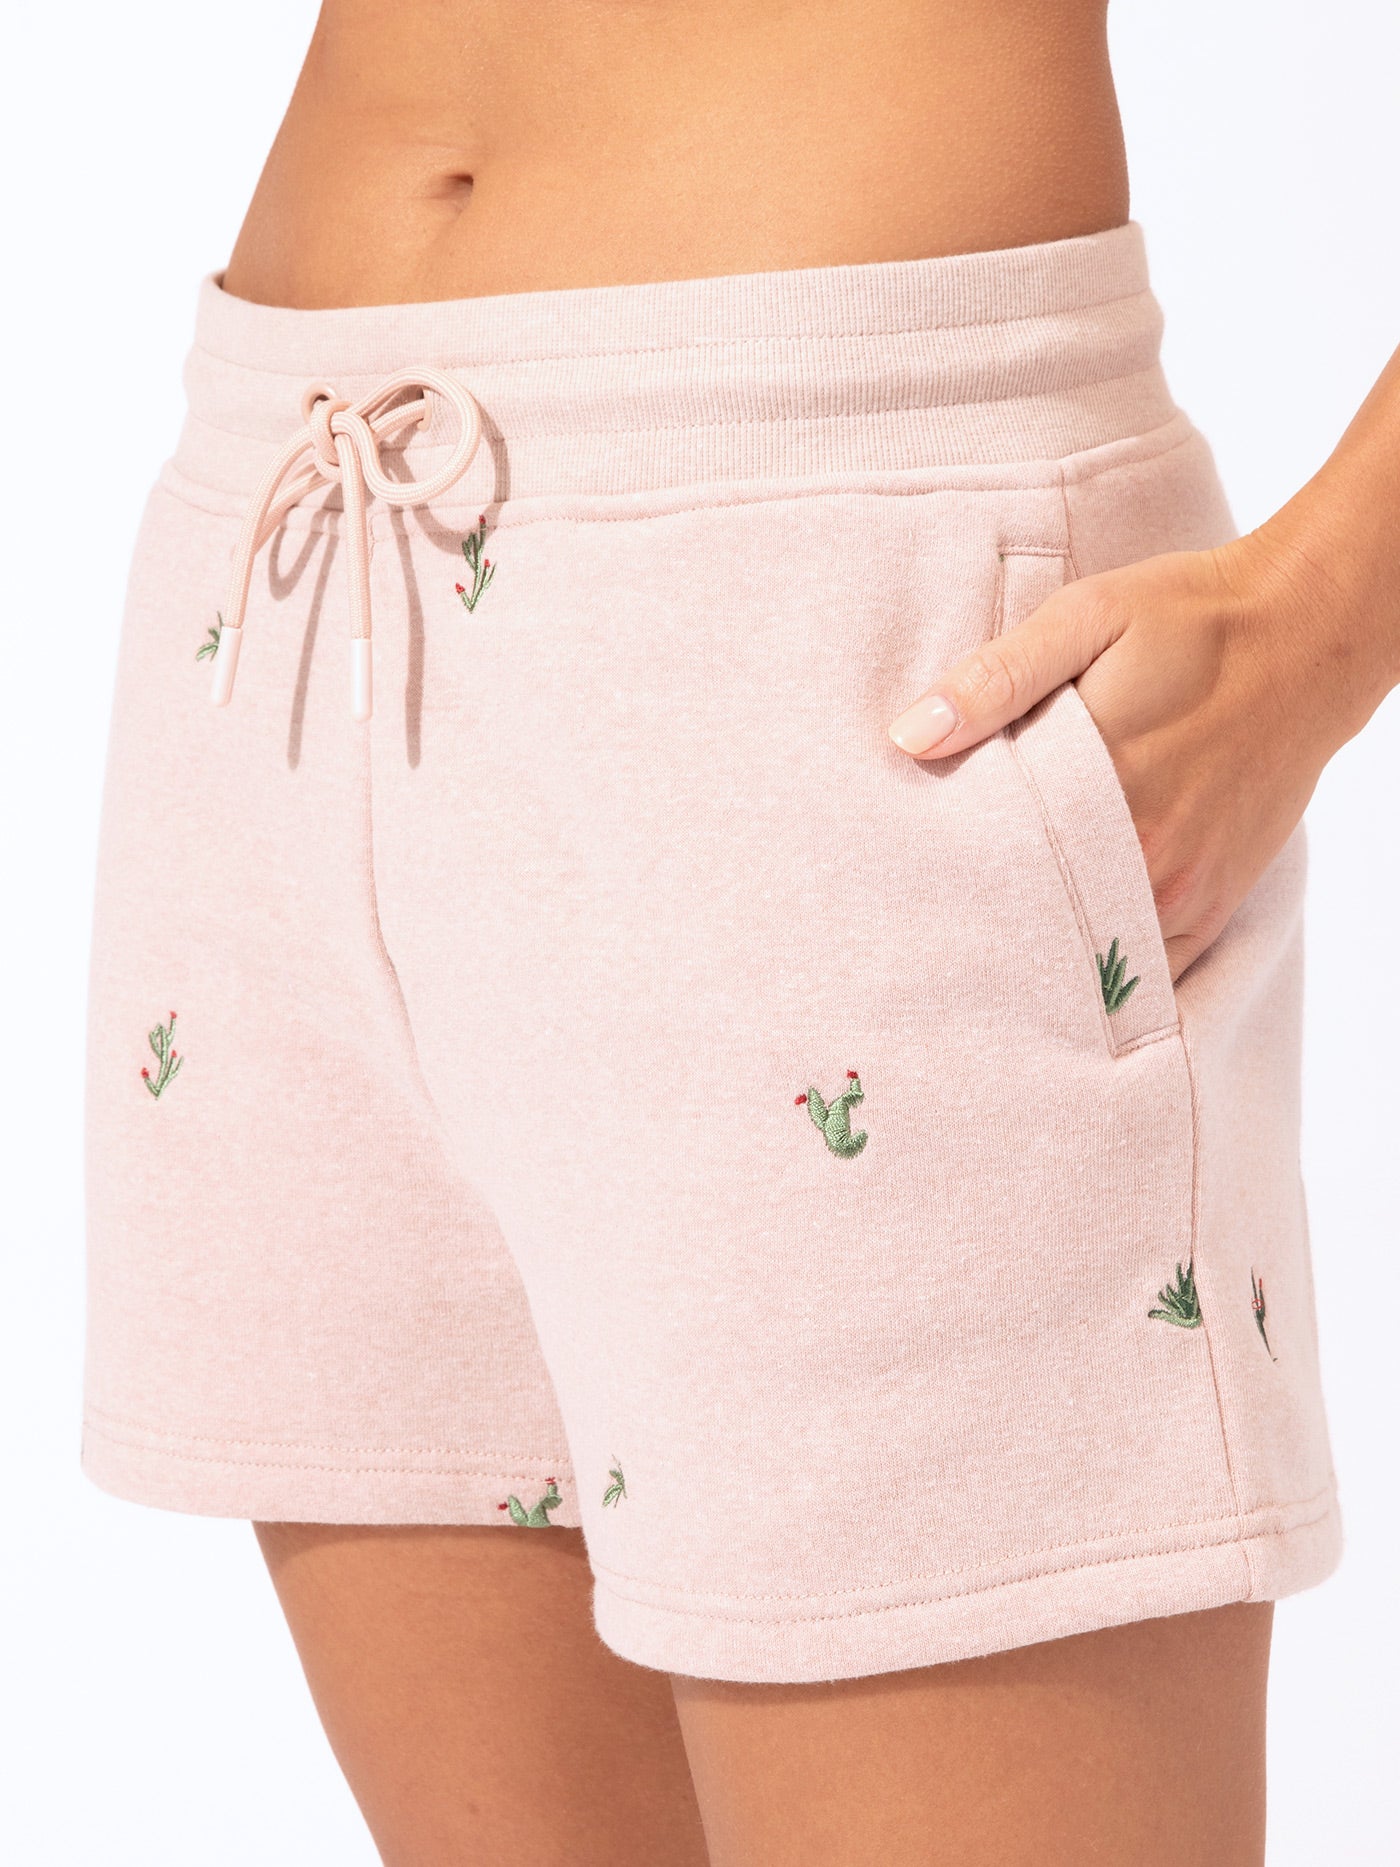 Cacti Embroidery Fleece Short Womens Bottoms Shorts Threads 4 Thought 